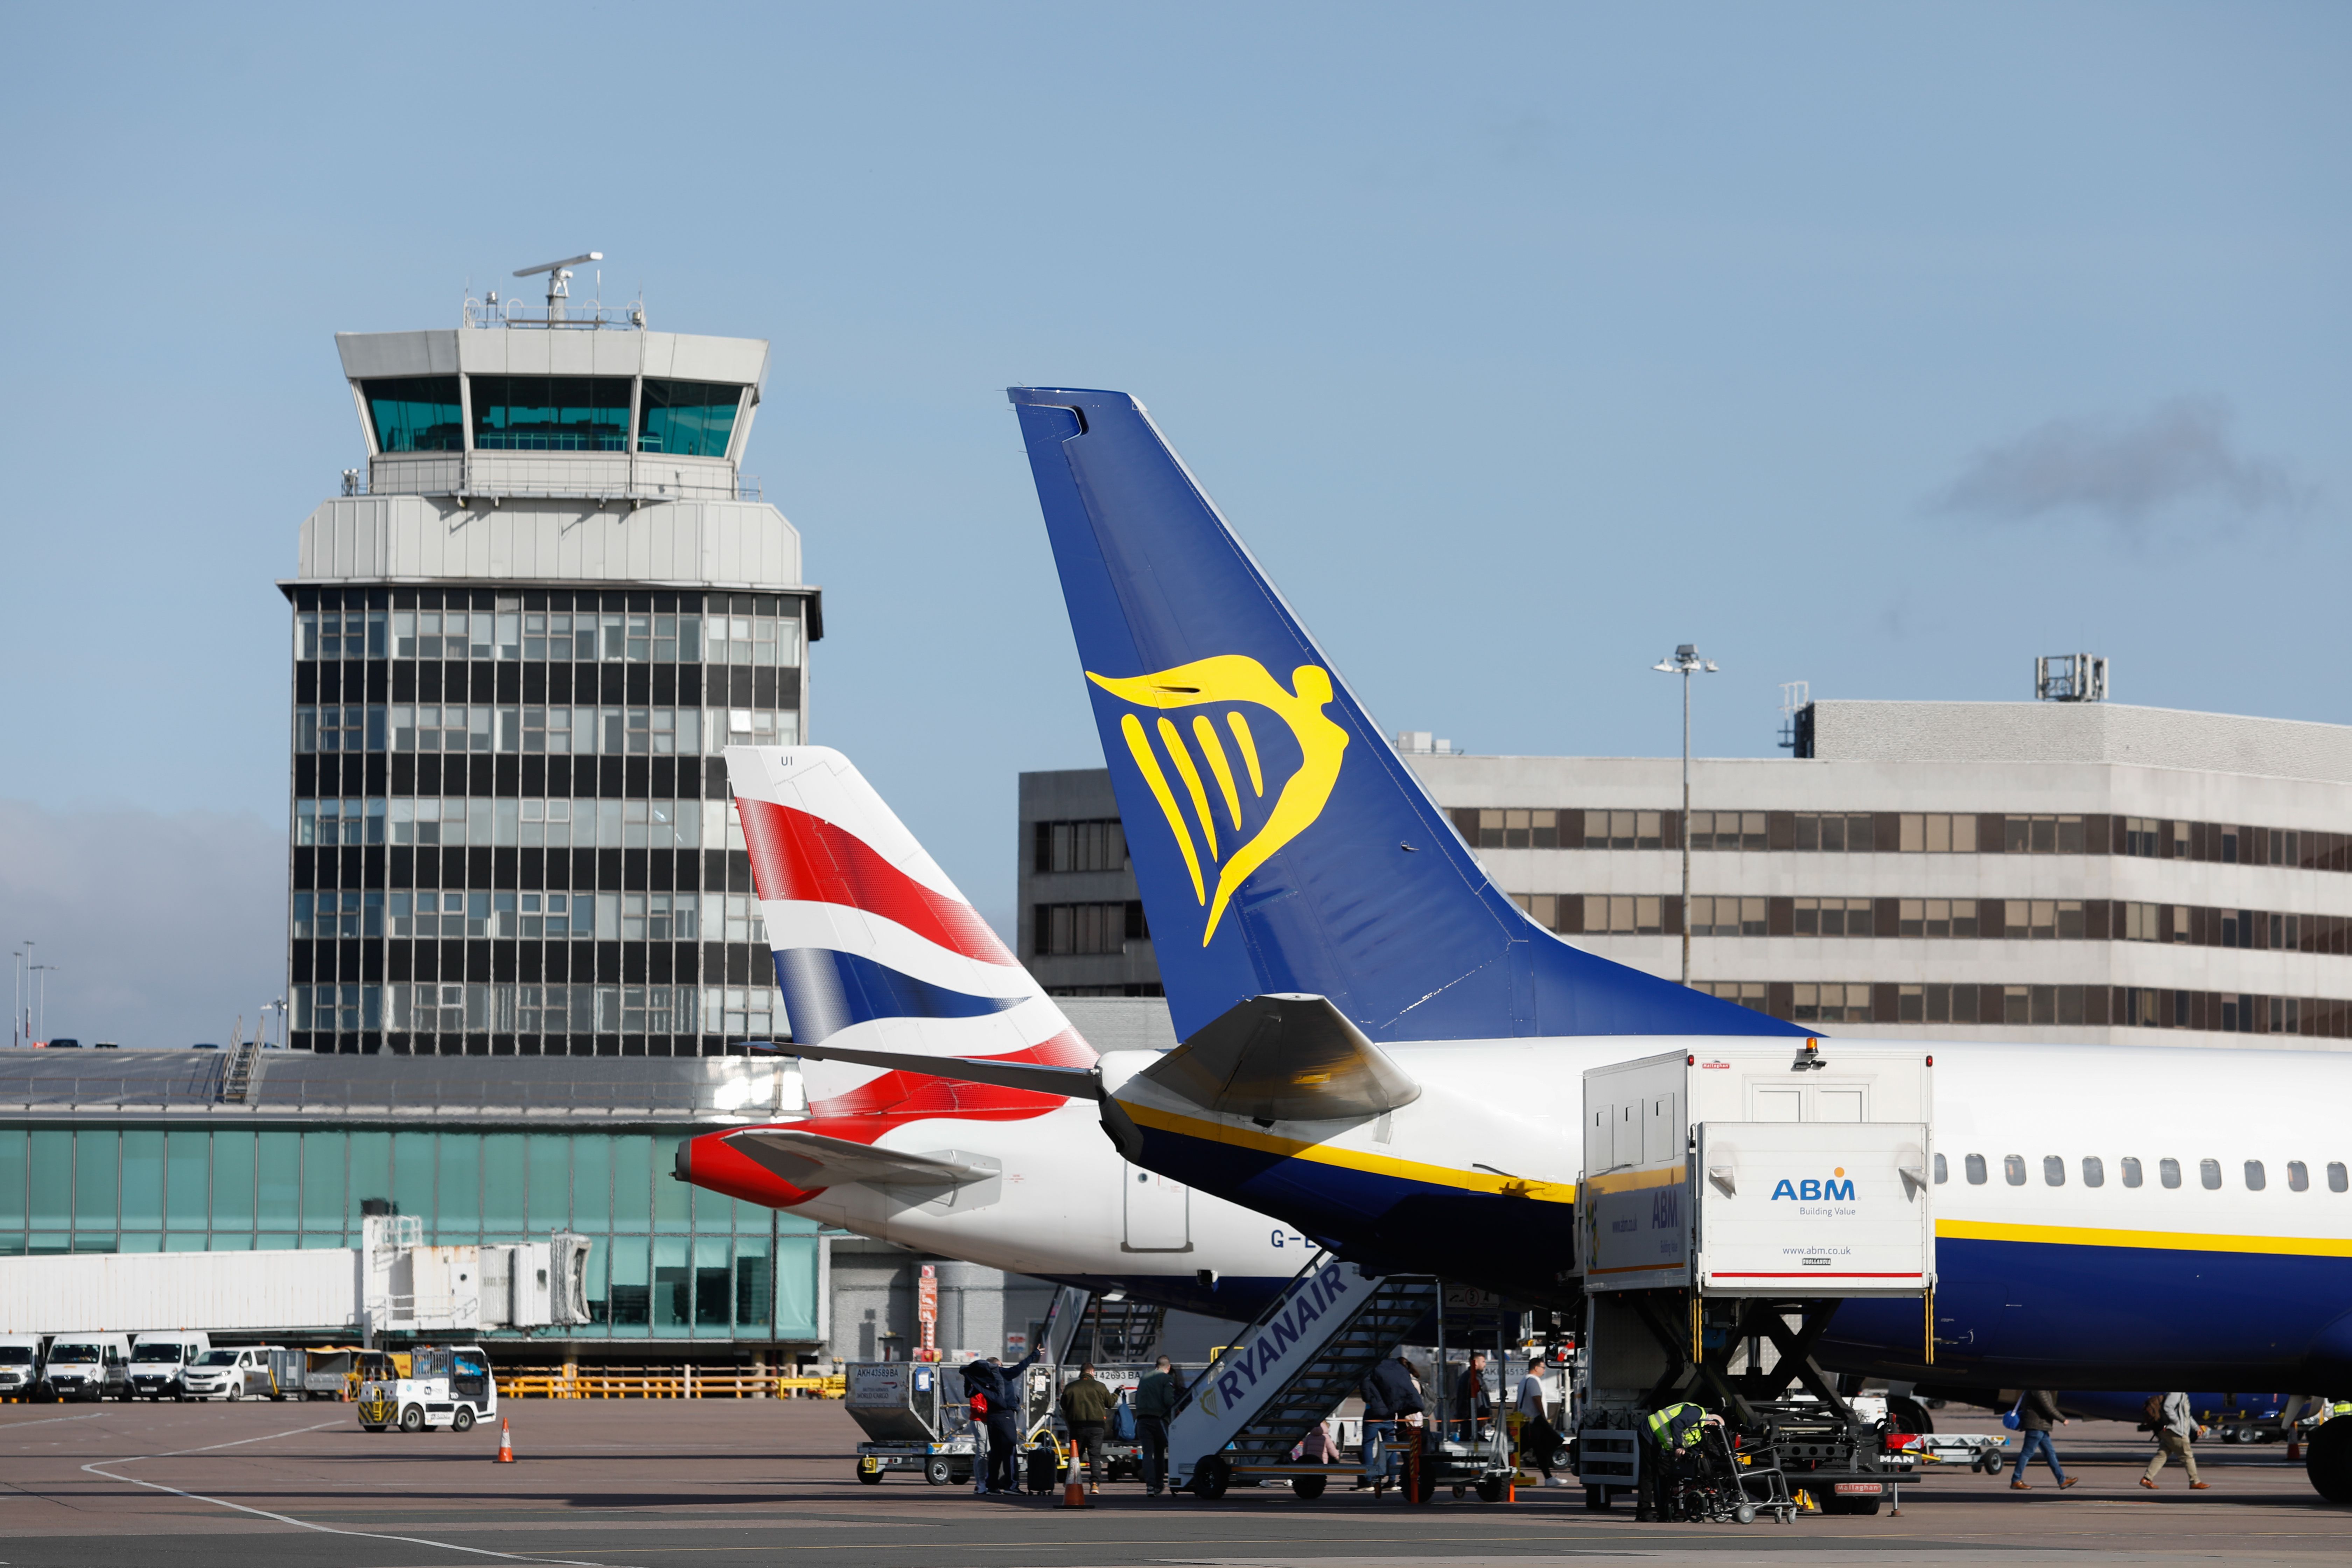 British Airways & Ryanair Aircraft parked on the apron At Manchester Airport.